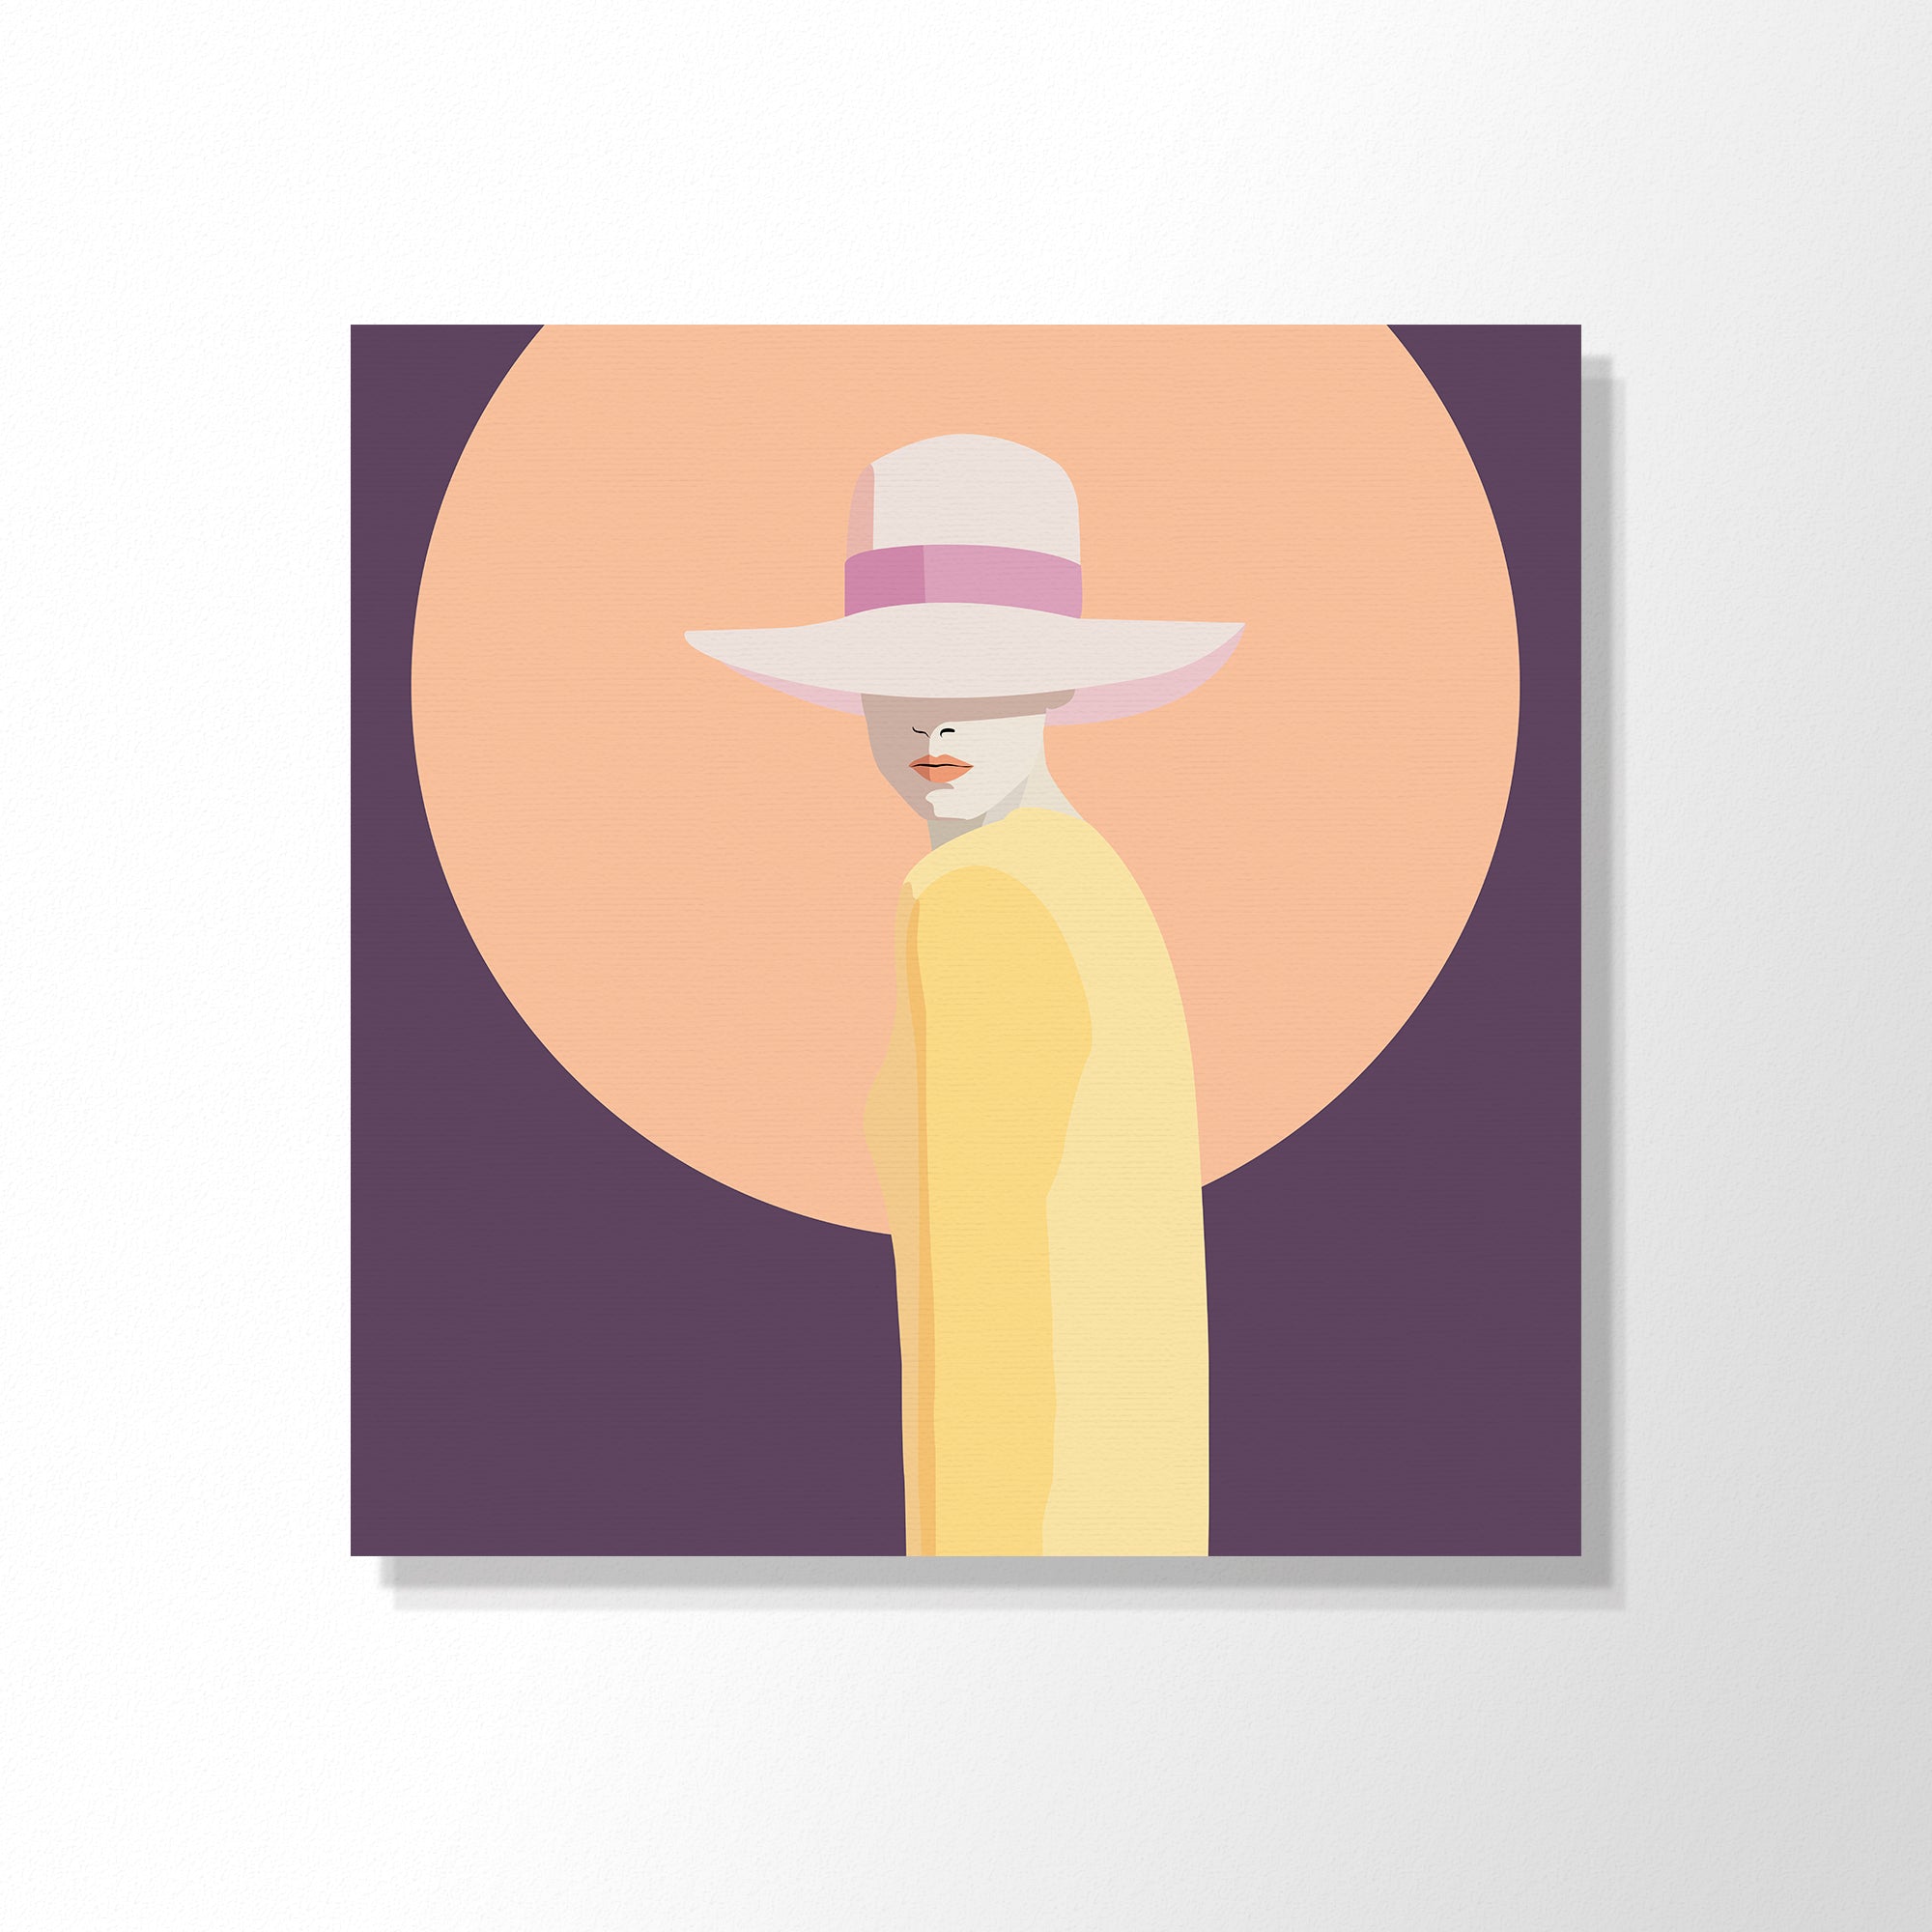 Cool Cats 1 - purple background - powder circle - cool lady looking over shoulder - yellow dress and light powder hat